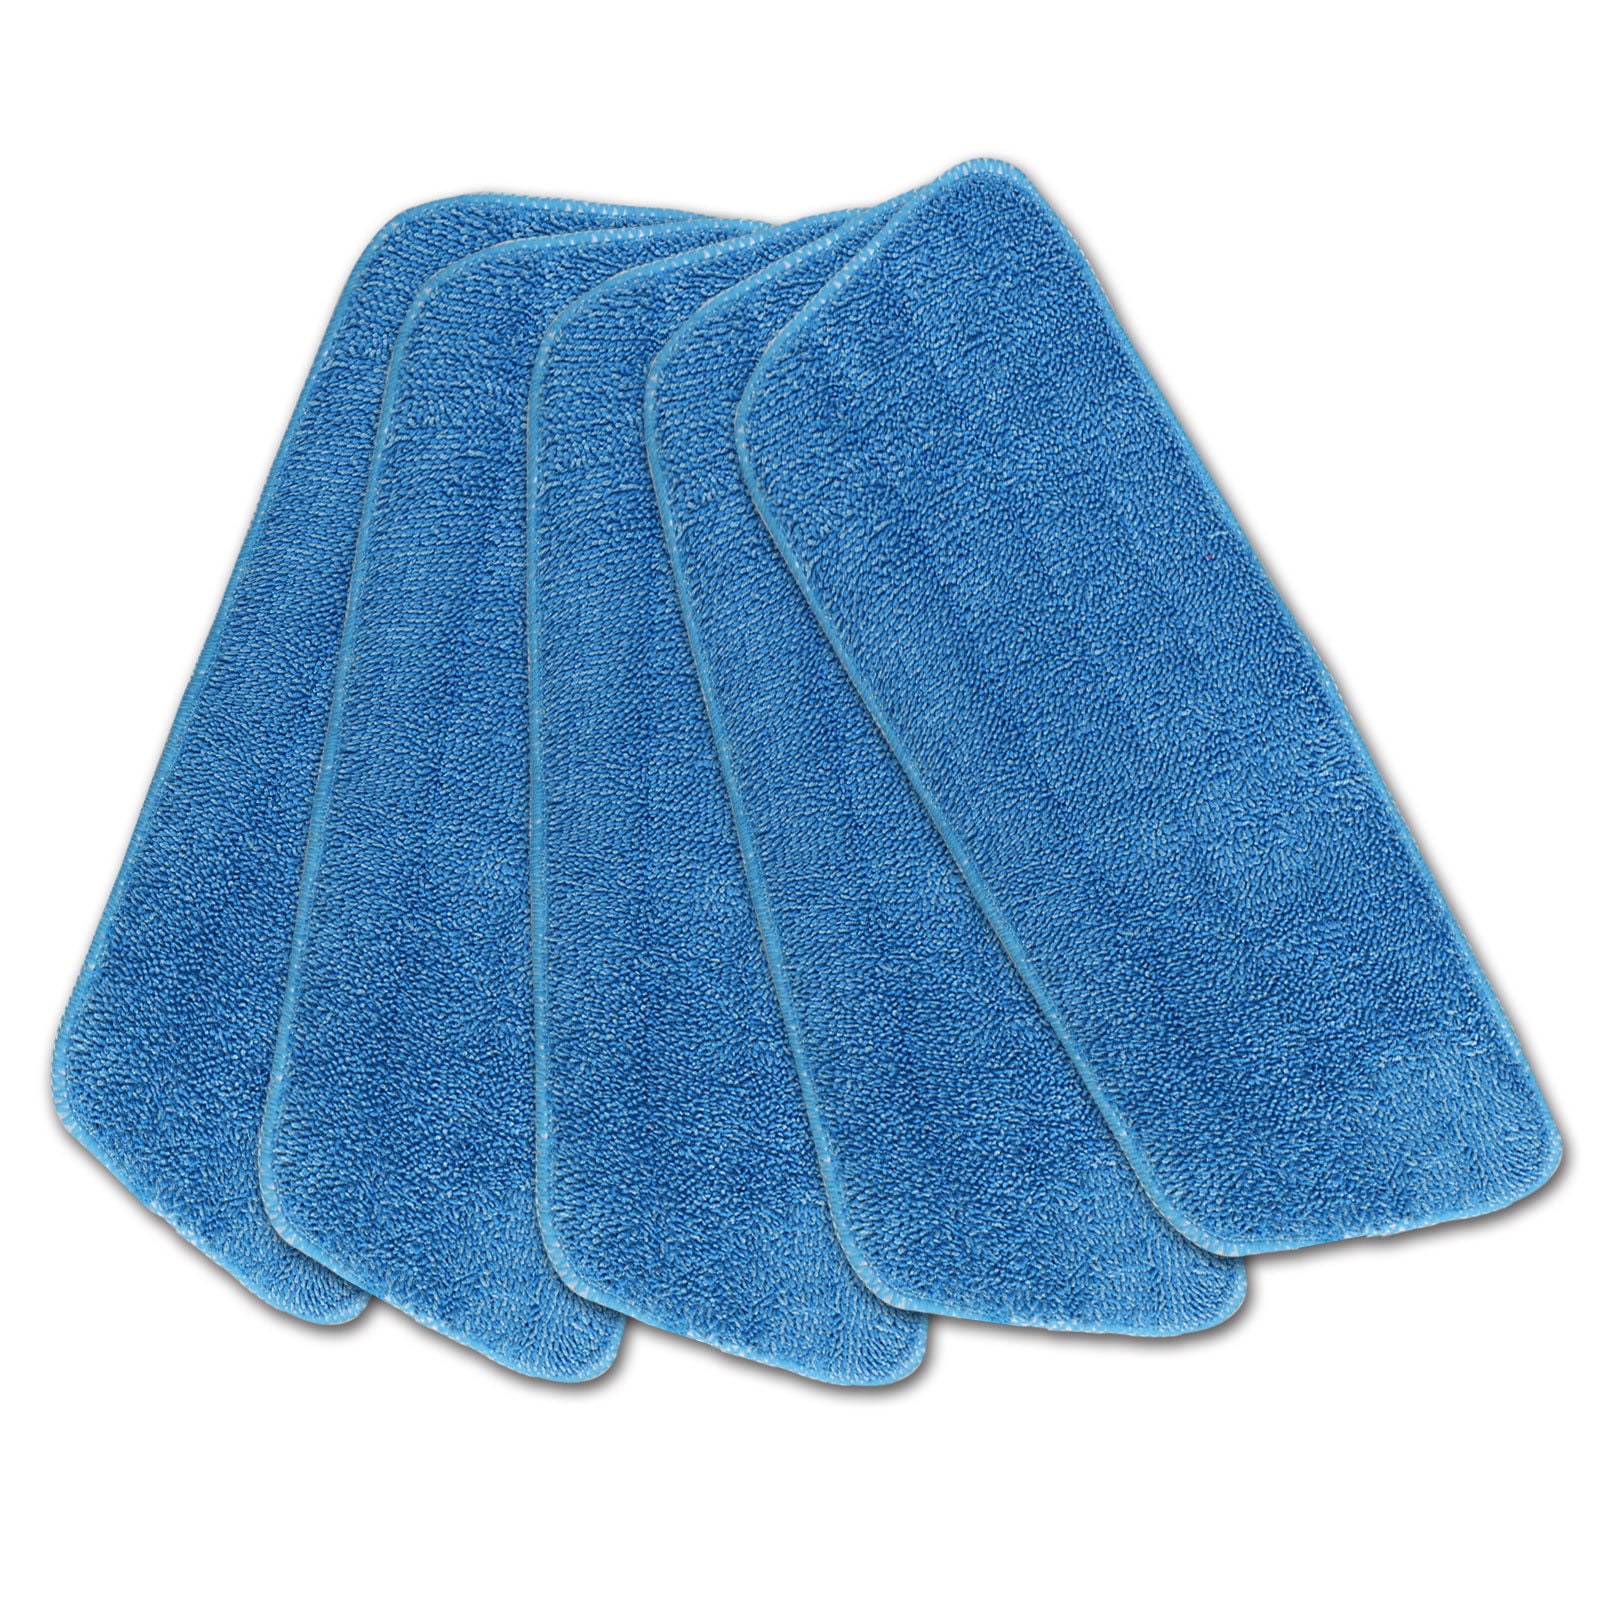 5x Replacement Household Spray Mop Reusable Microfiber Mop Cloth Cleaning Pad 